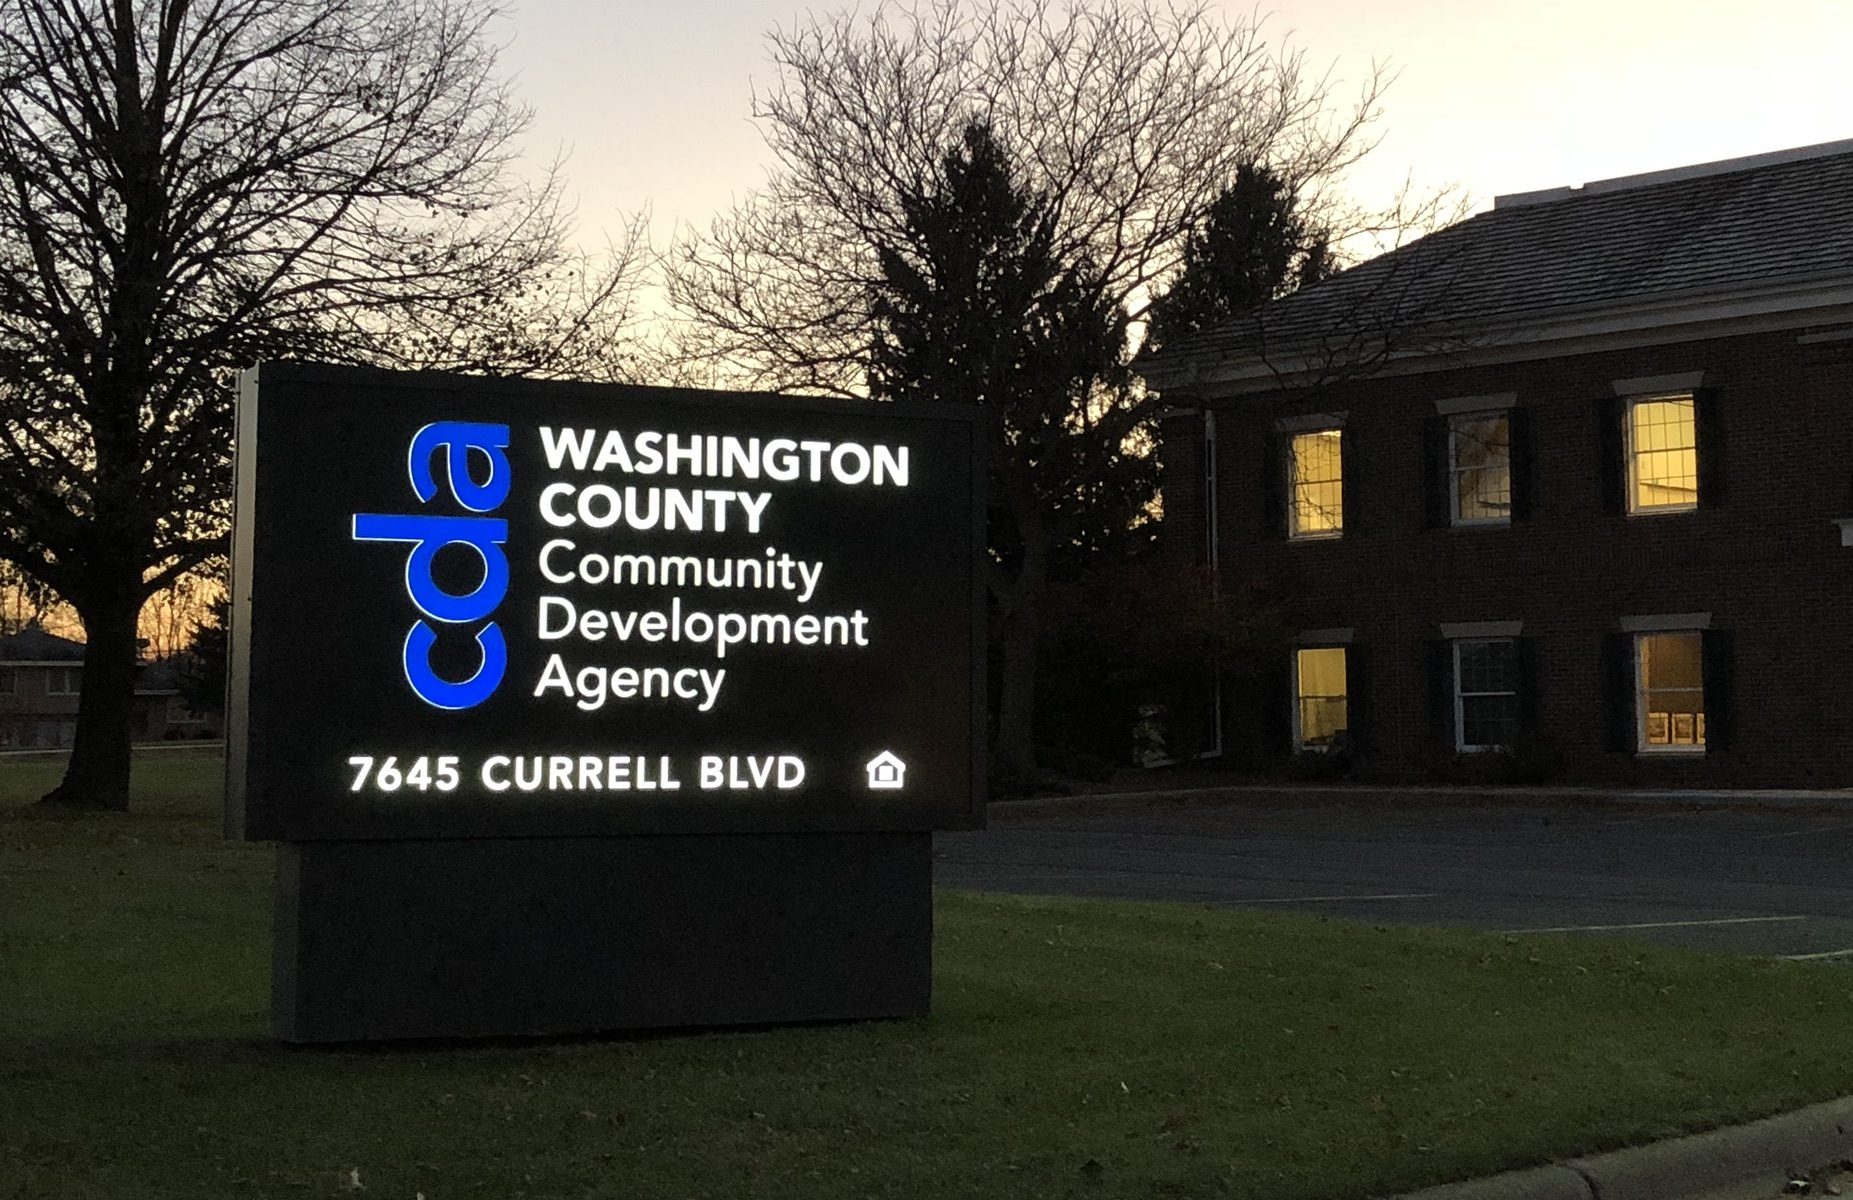 Washington Country Community Development Agency Sign and Building